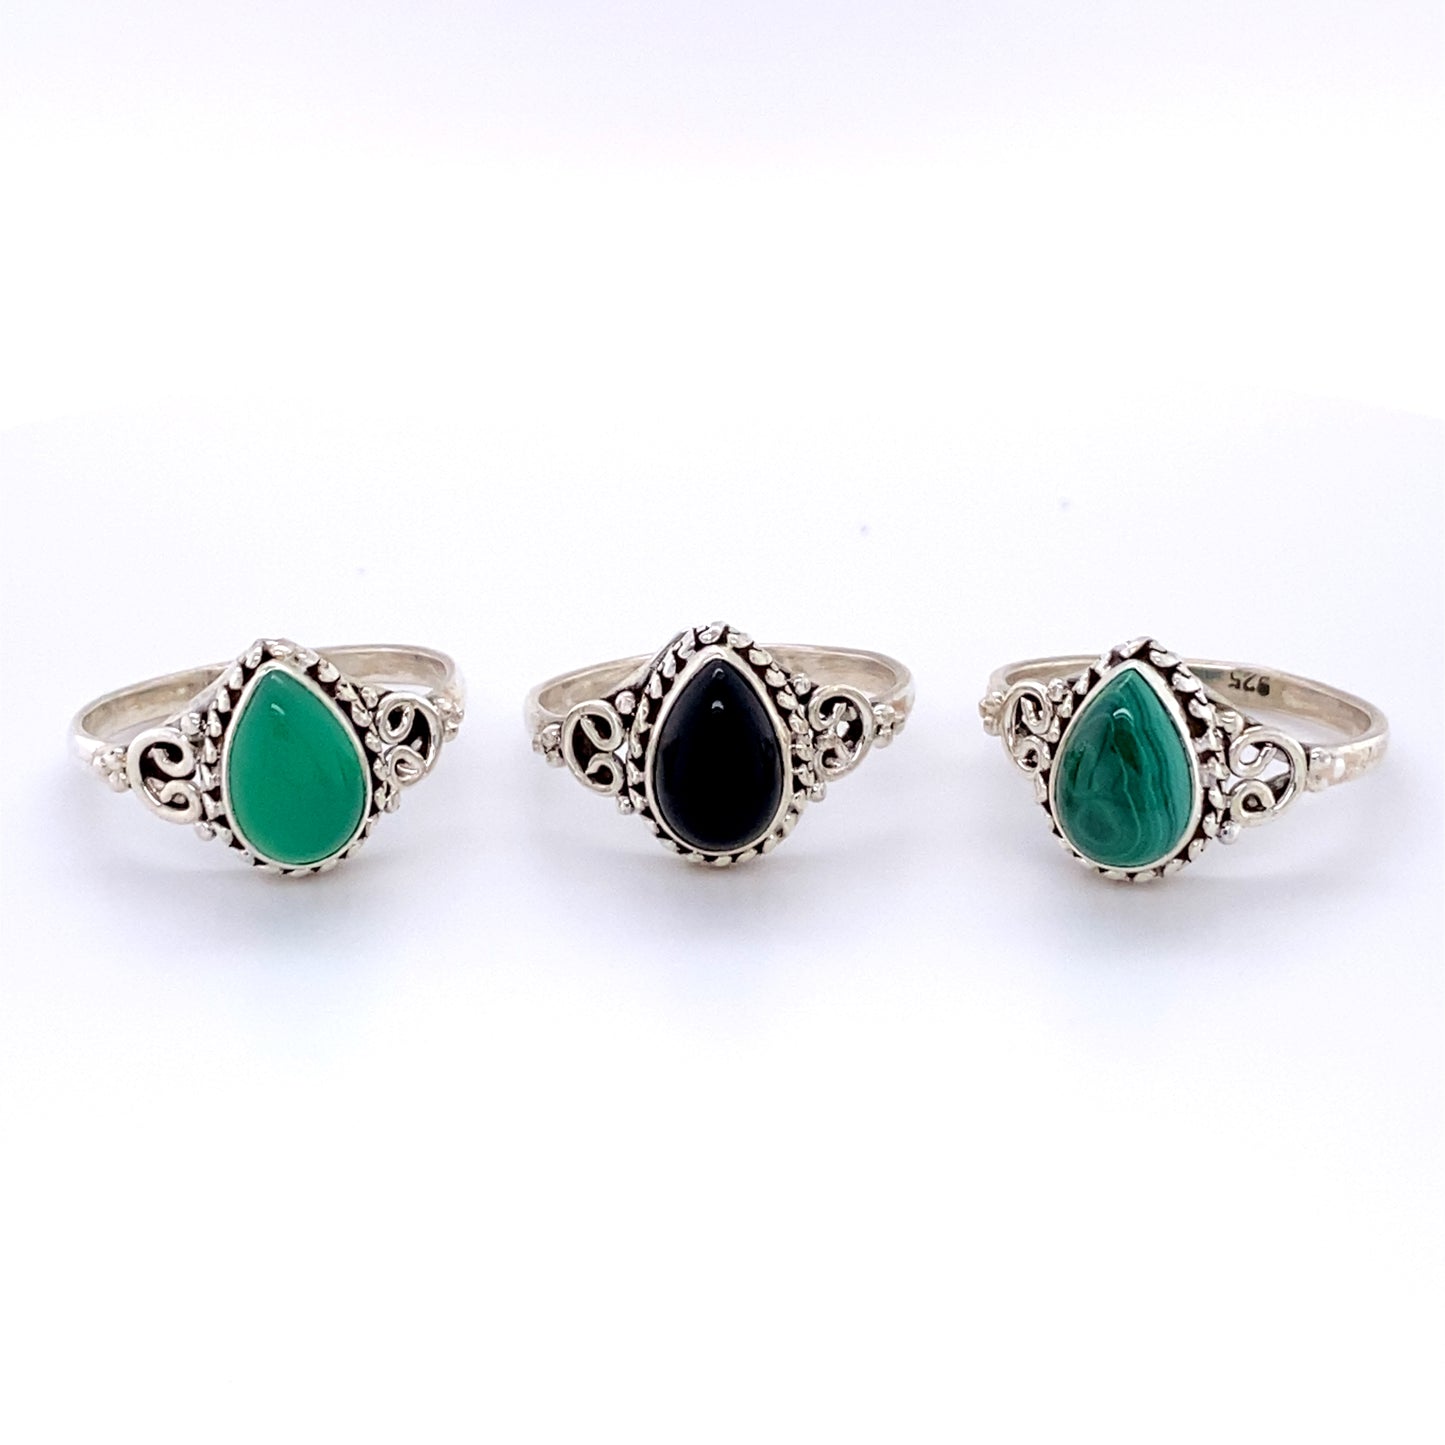 Three Teardrop Gemstone Rings with Intricate Ball Border in a boho style.